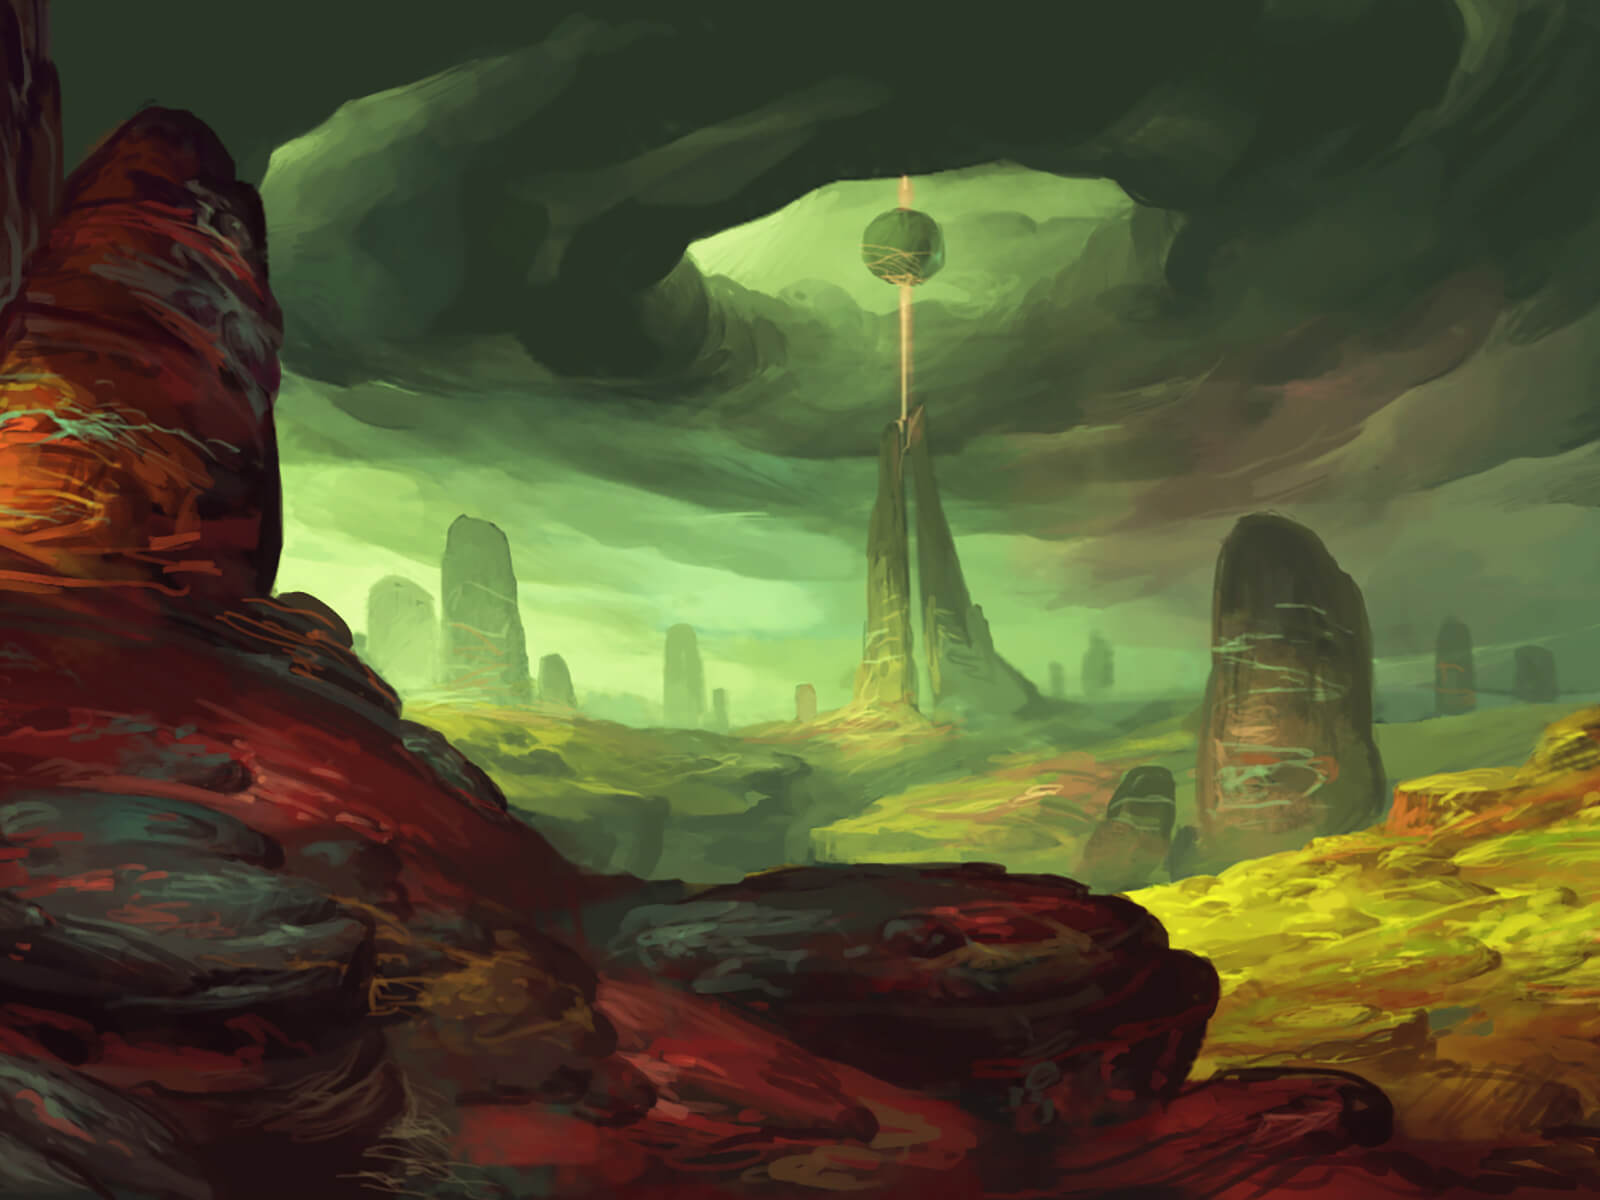 A rocky, alien environment with colorful outcroppings. A sphere floats above one such pinnacle surrounded by storm clouds.